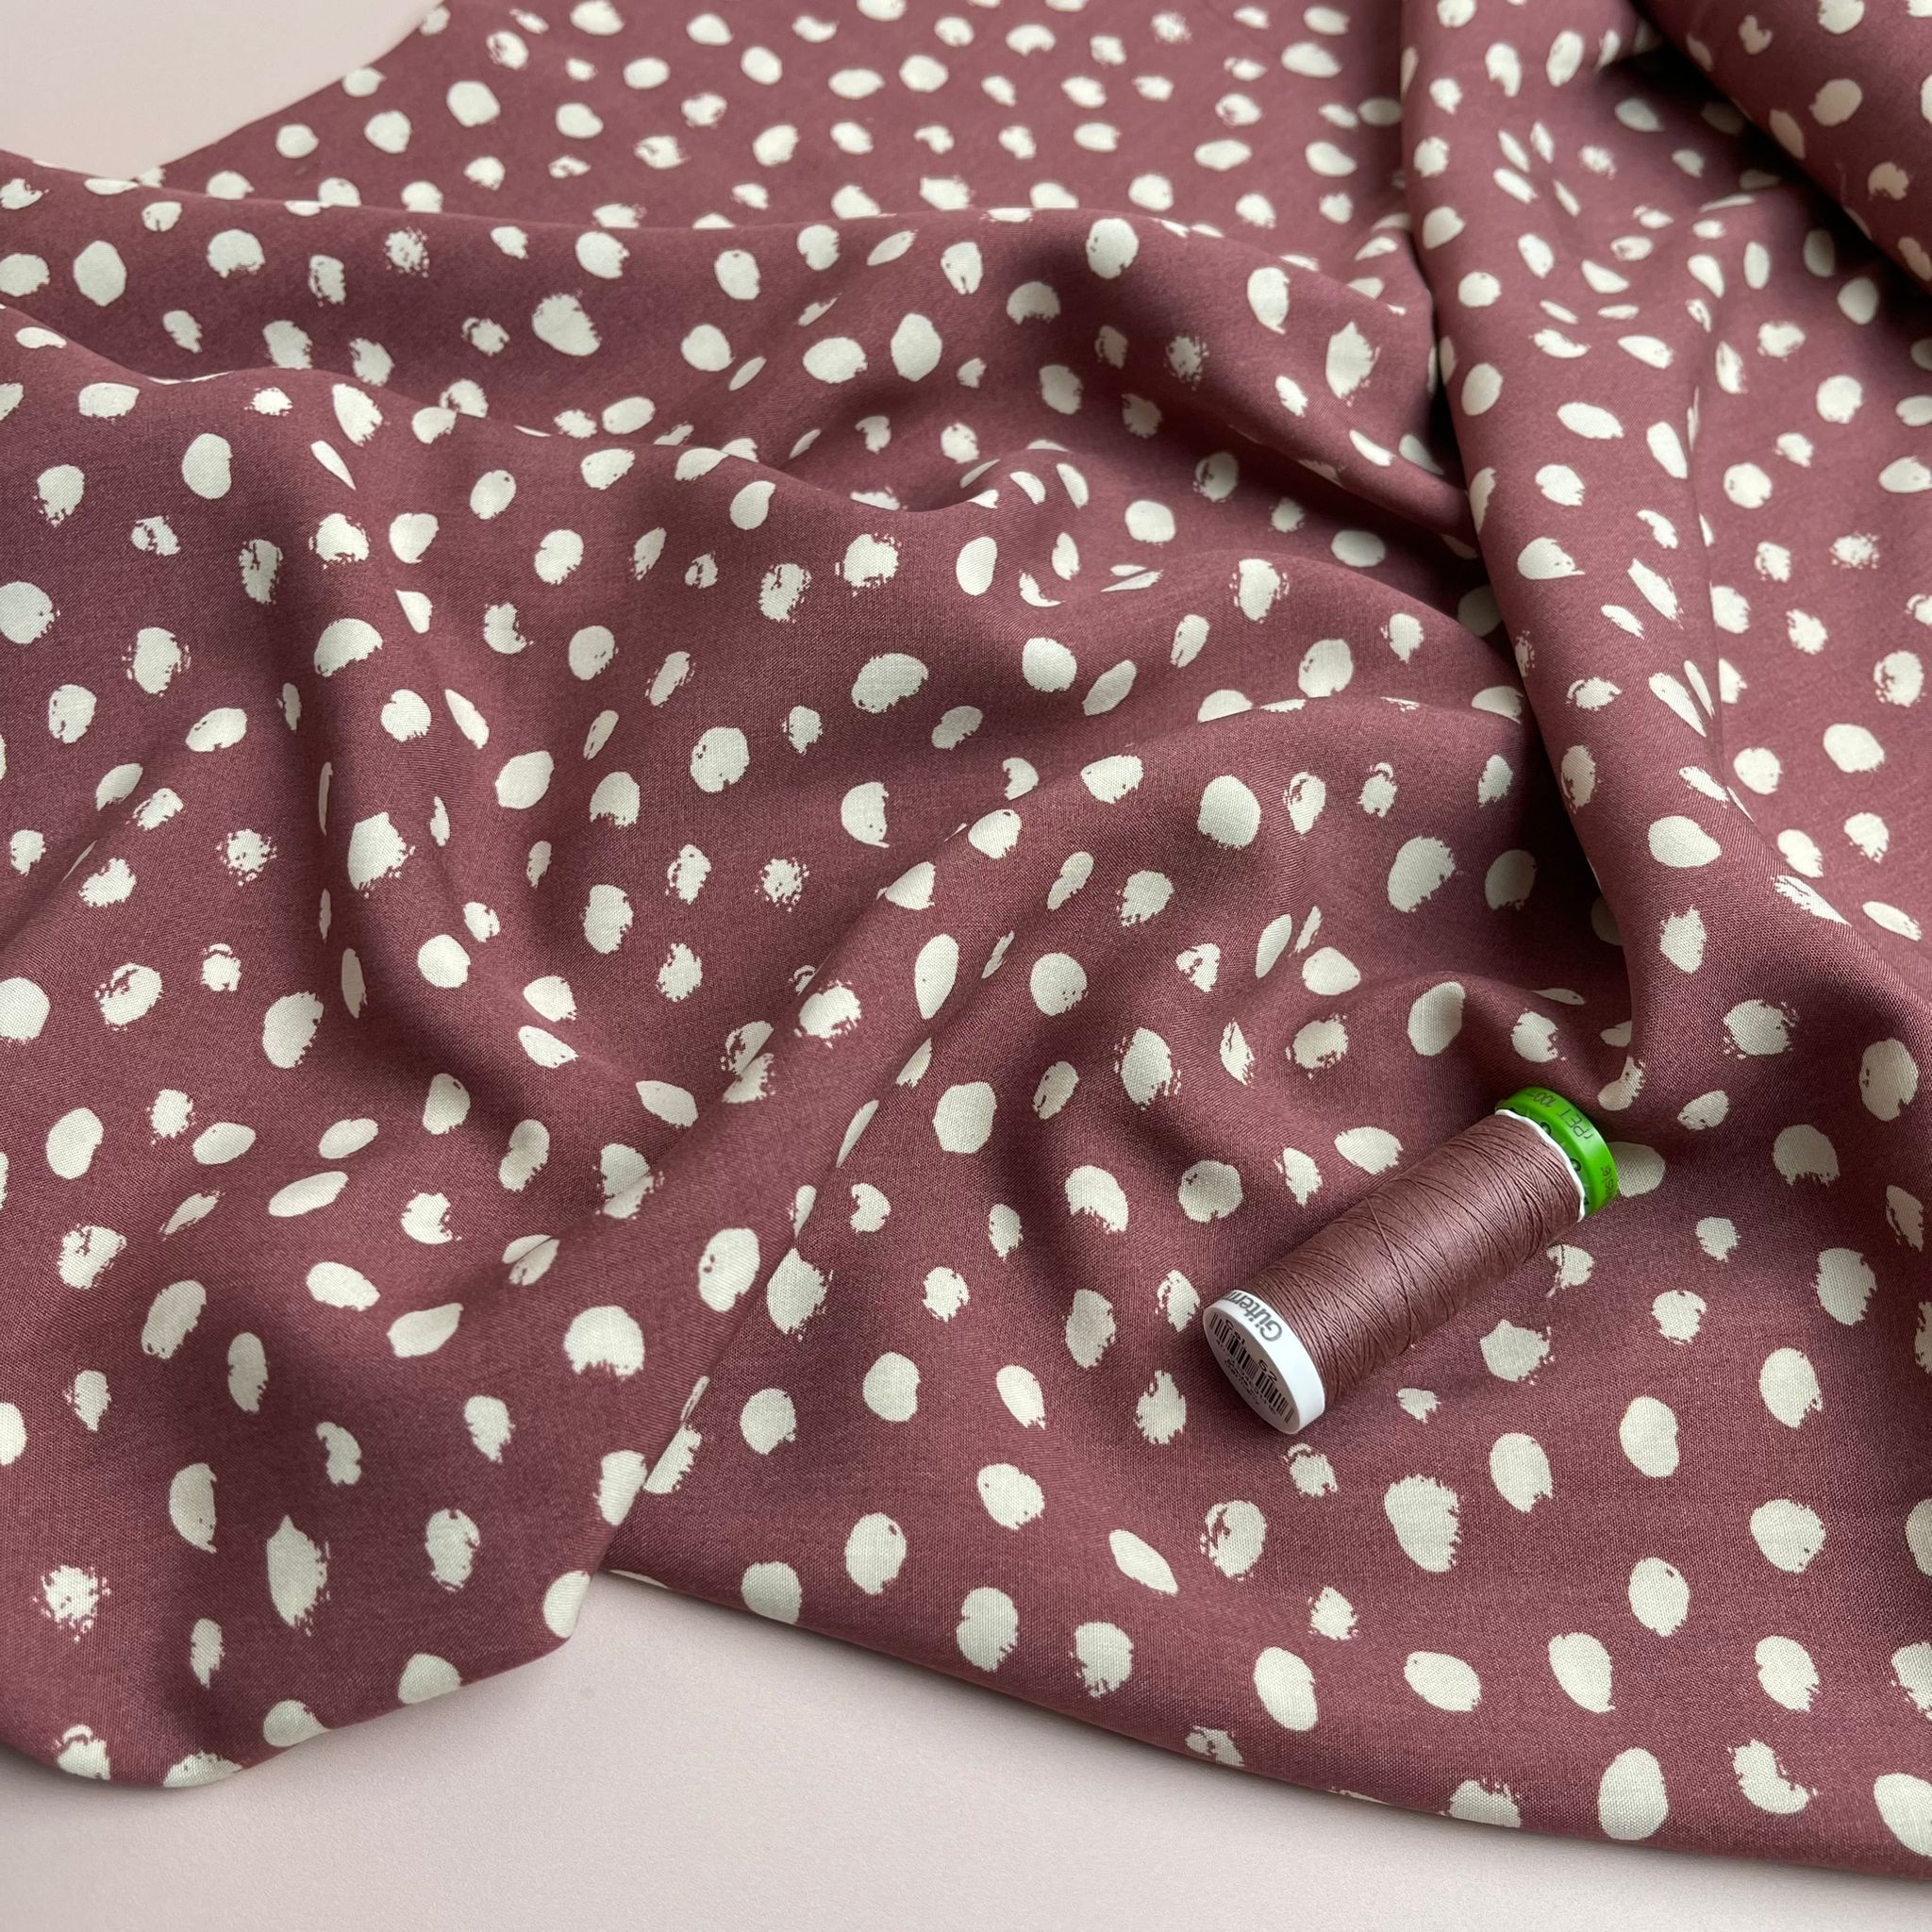 REMNANT 2.83 Metres - Abstract Dots on Mauve Viscose Fabric